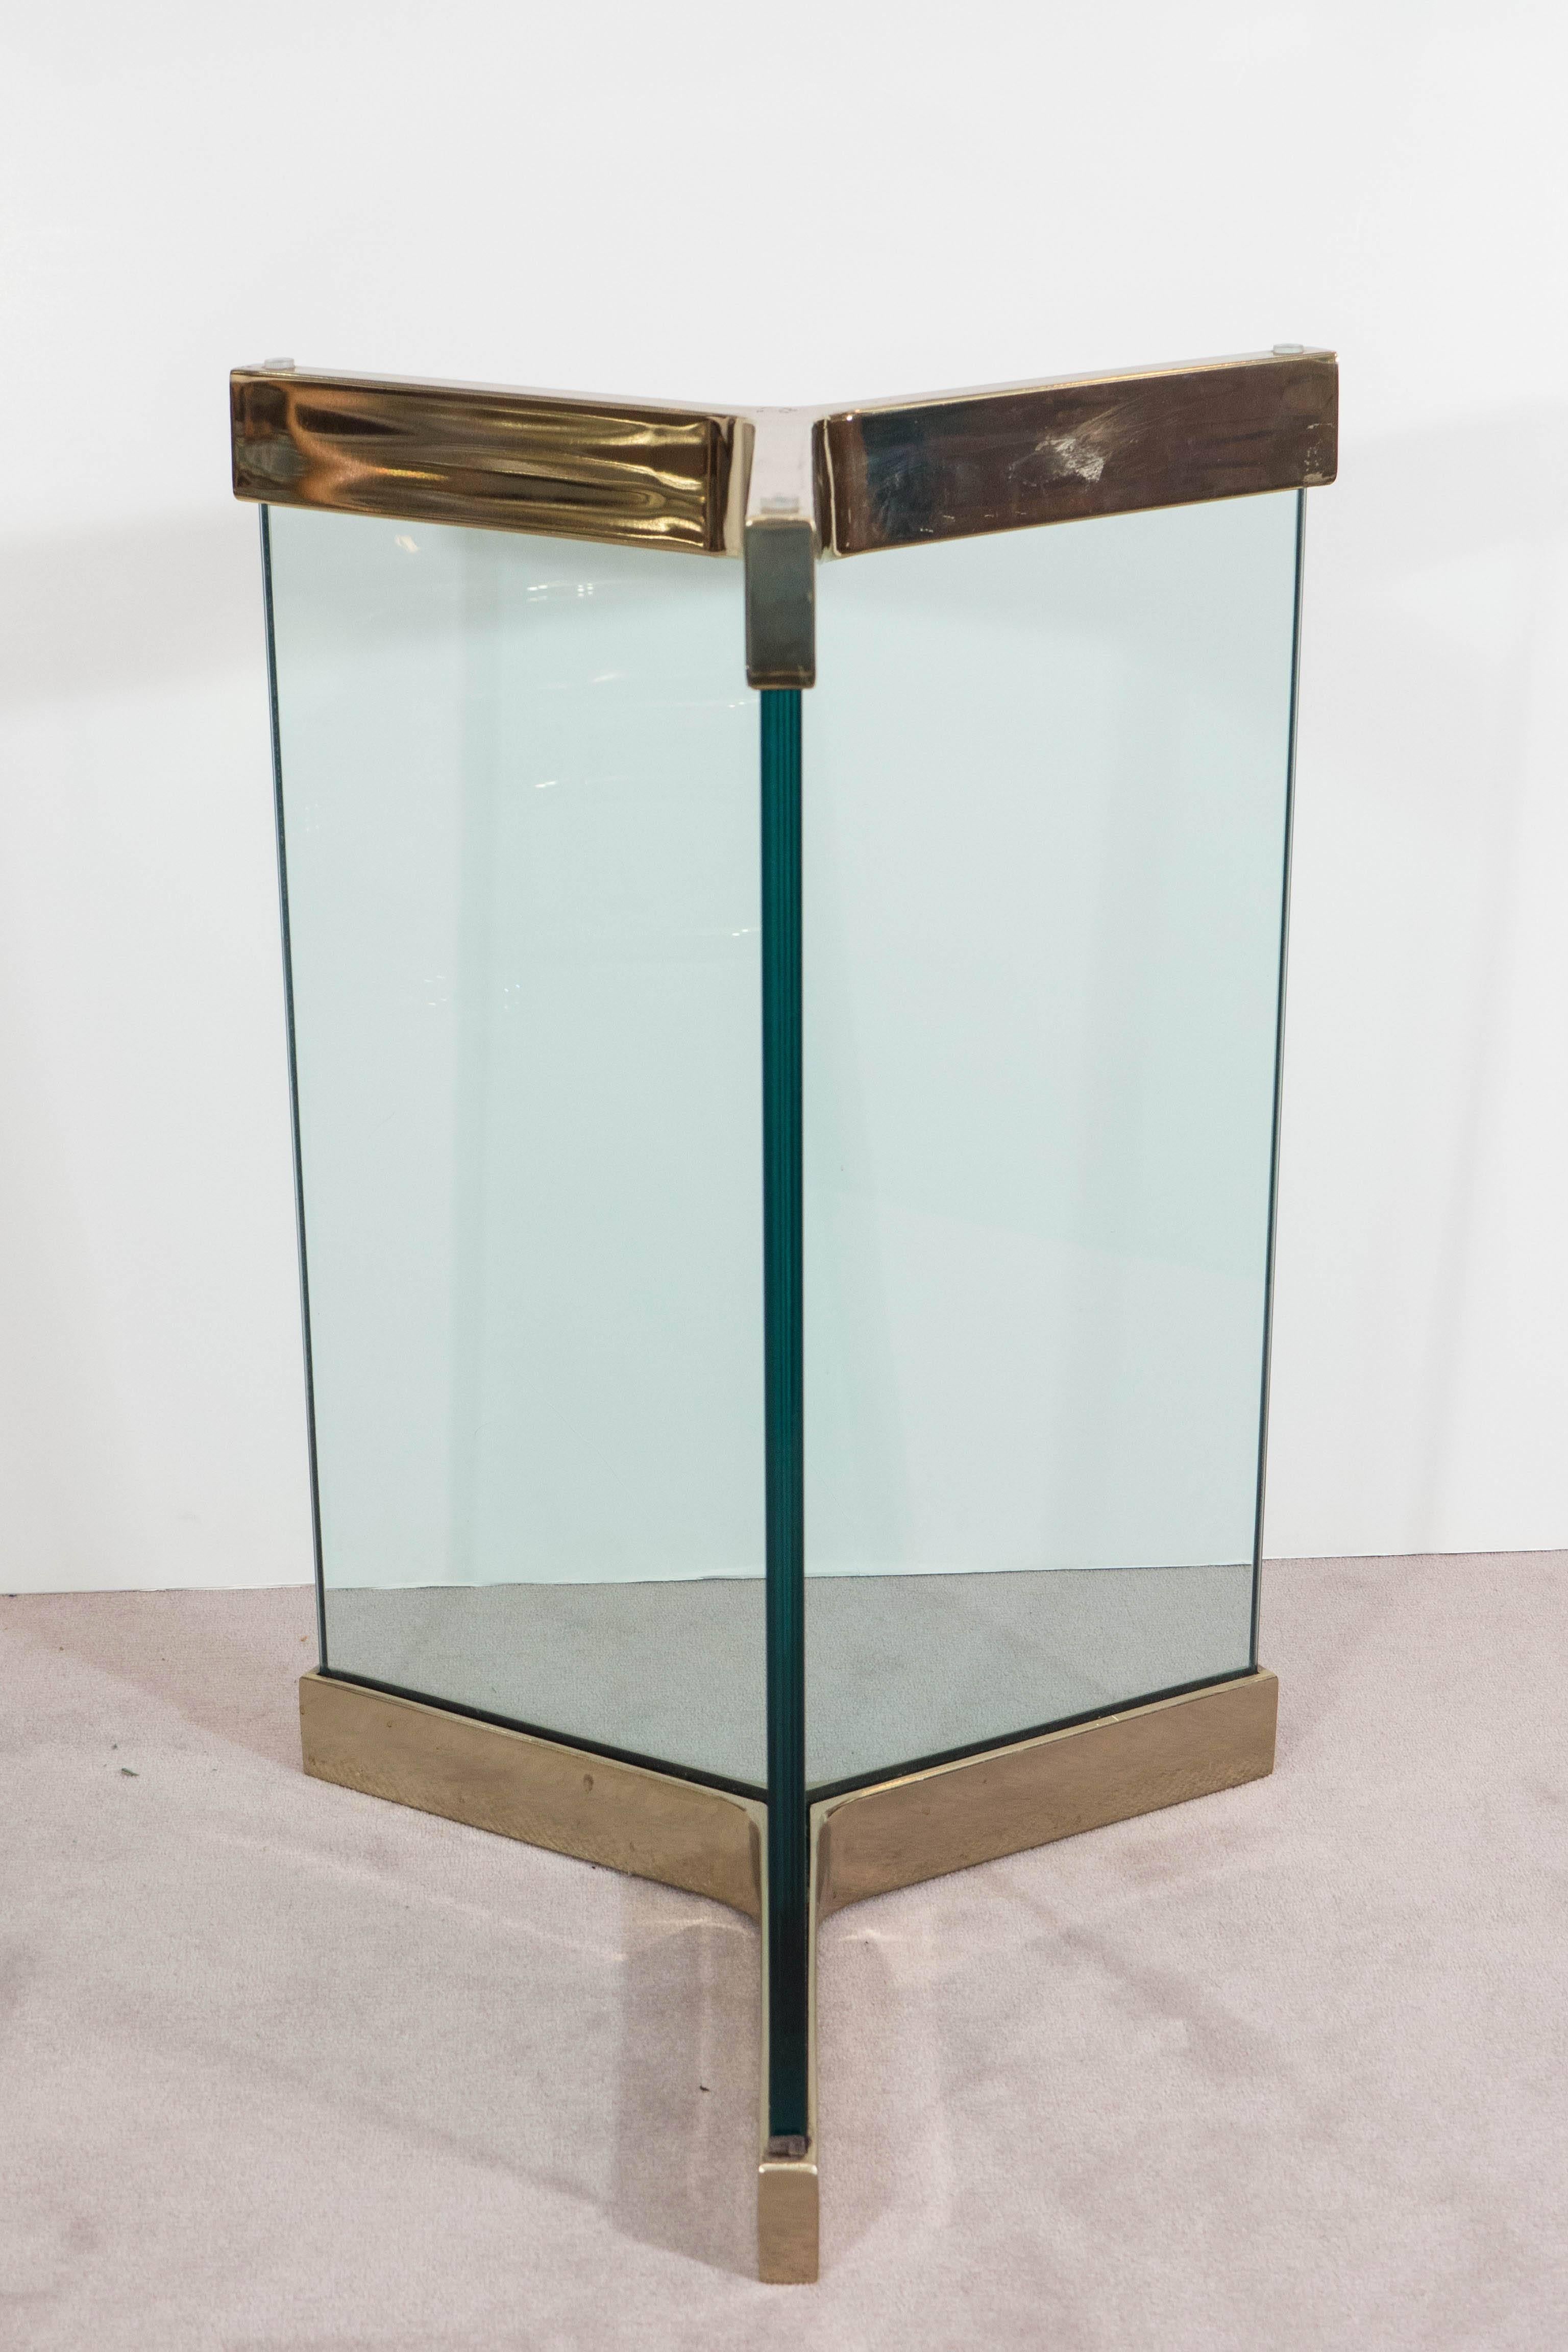 A pair of vintage table bases for a dining table, designed circa 1970s by Leon Rosen for the Pace Collection, each with thick, three-sided glass panels, framed to the top and bottom in polished brass. Very good condition, with age appropriate wear.